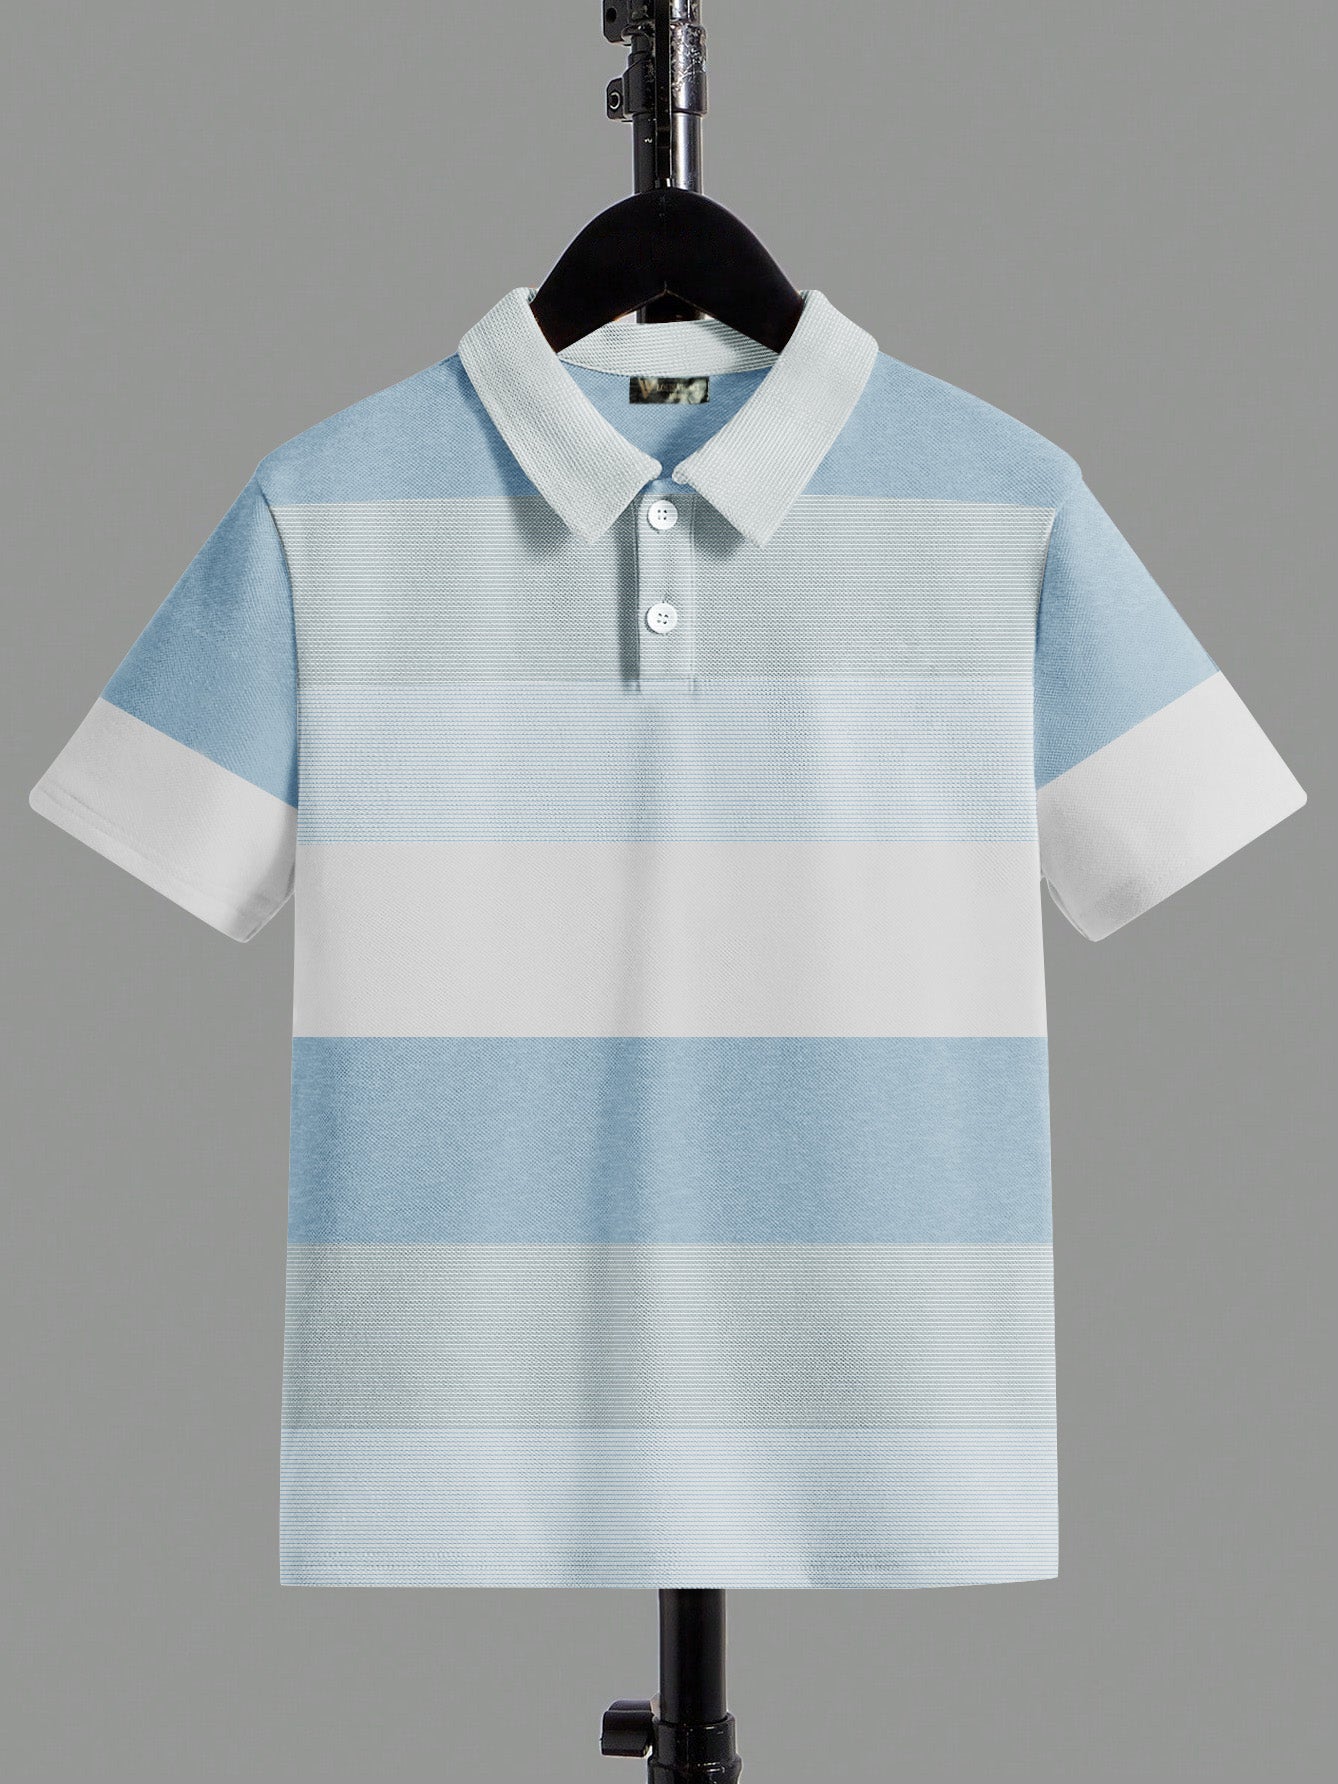 Louis Vicaci Single Jersey Polo Shirt For Kids-White with Sky Stripes-SP1723